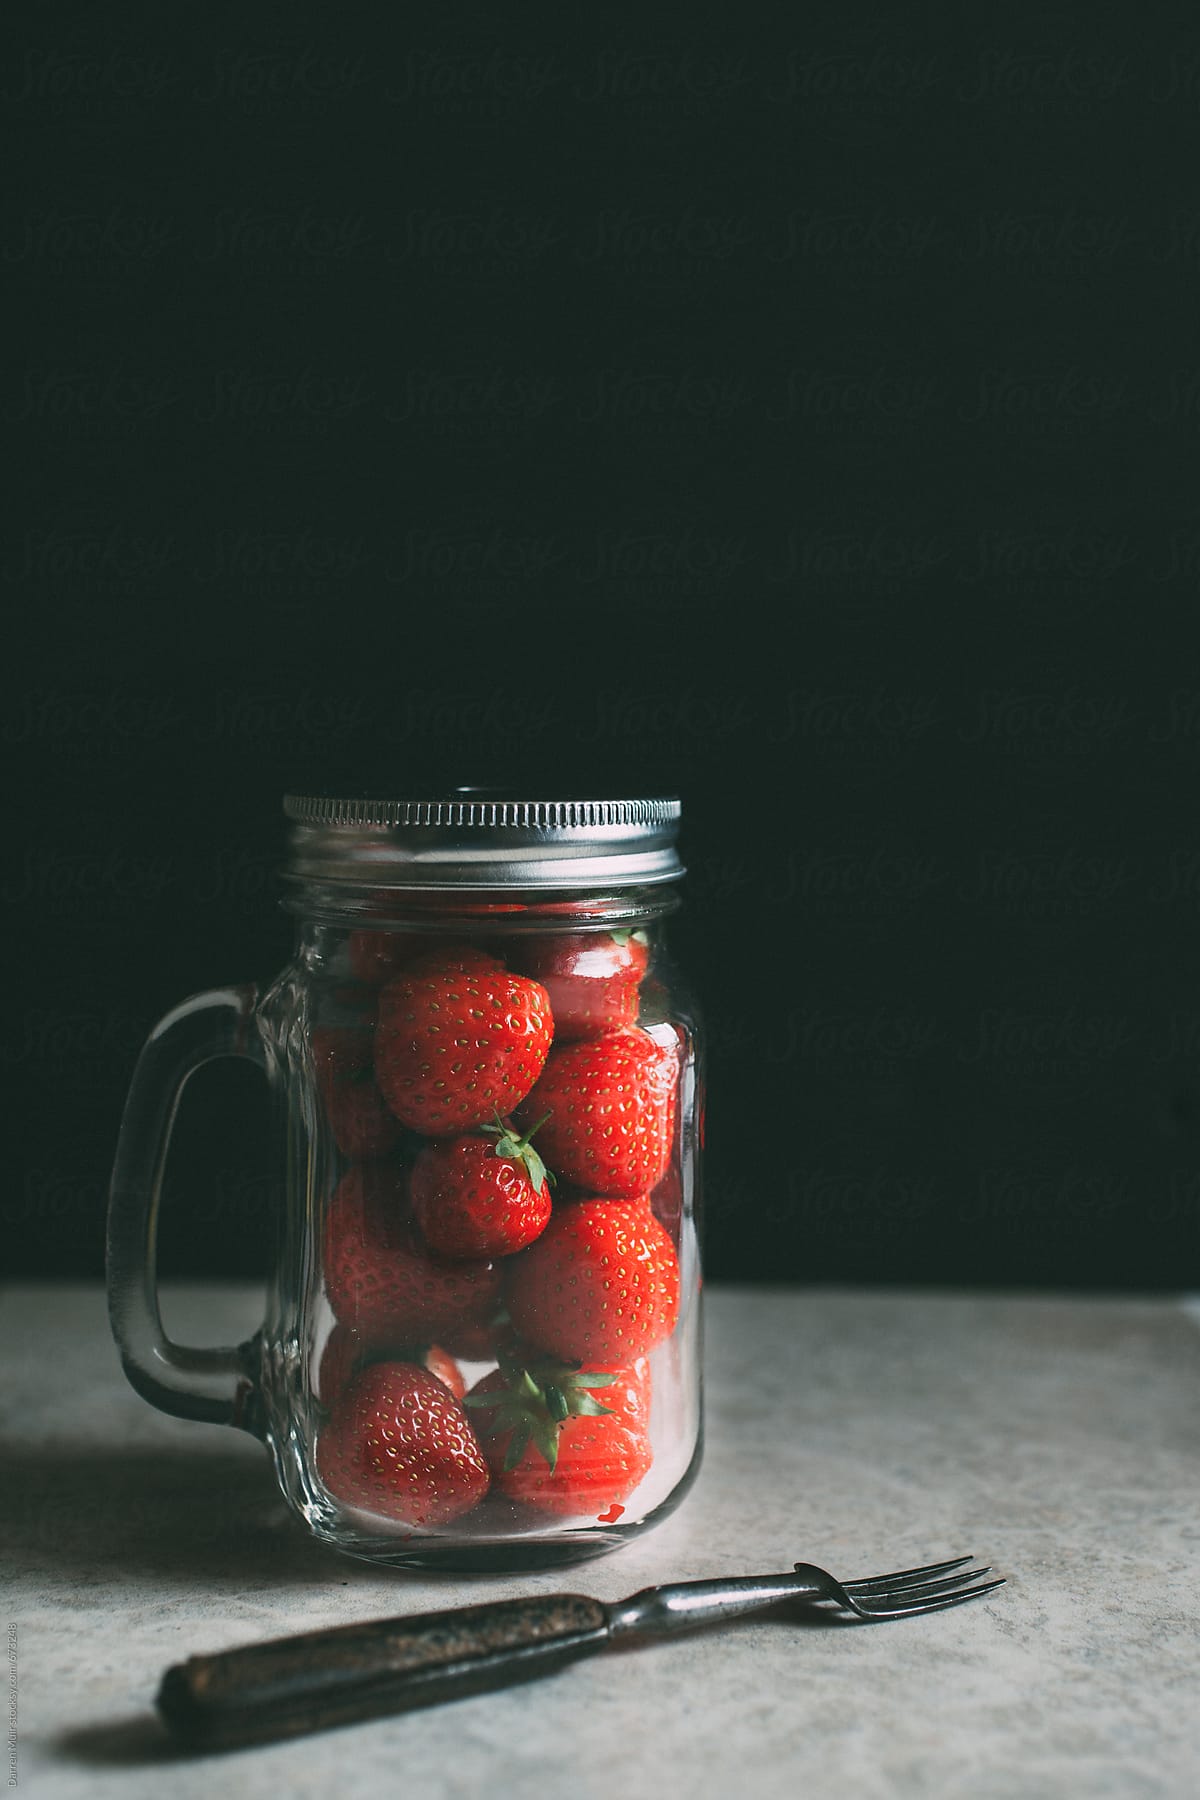 A jar of strawberries and a fork.